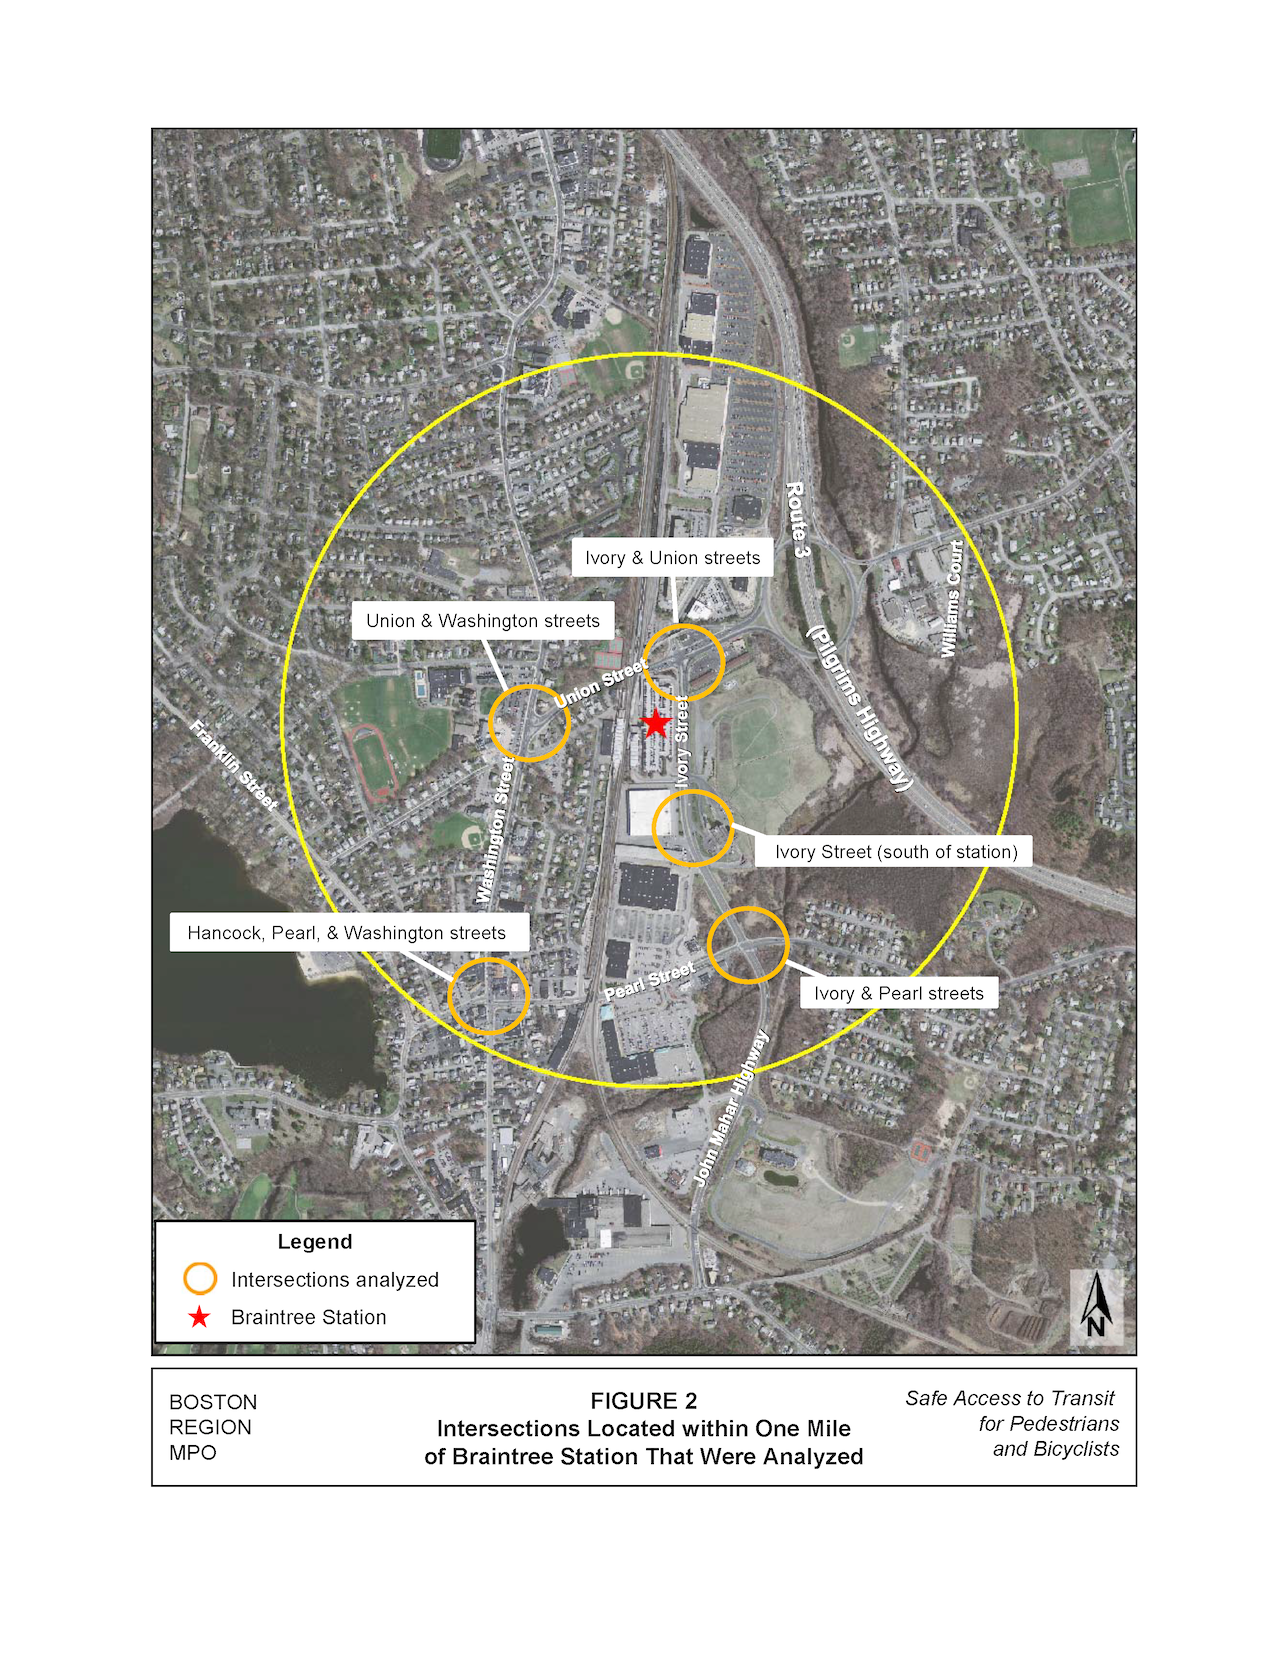 Figure 2 – Intersections Located within One Mile of Braintree Station that were Analyzed Figure 2 is an aerial photo that shows the locations of the intersections located within one mile of Braintree Station that were analyzed for this study.